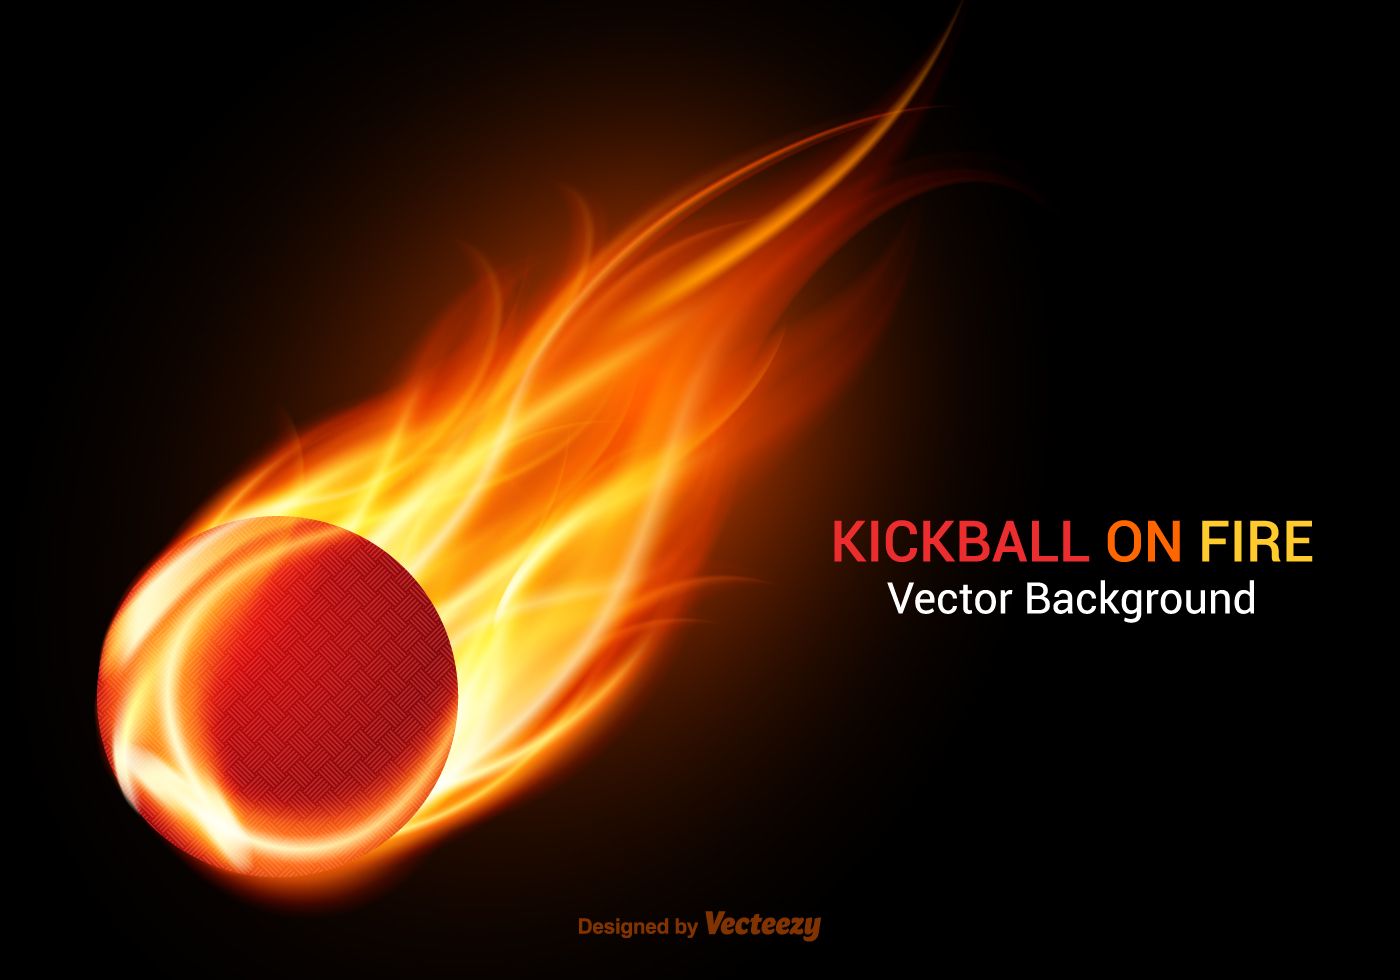 Free Kickball On Fire Vector Background. Fire vector, Vector background, Vector